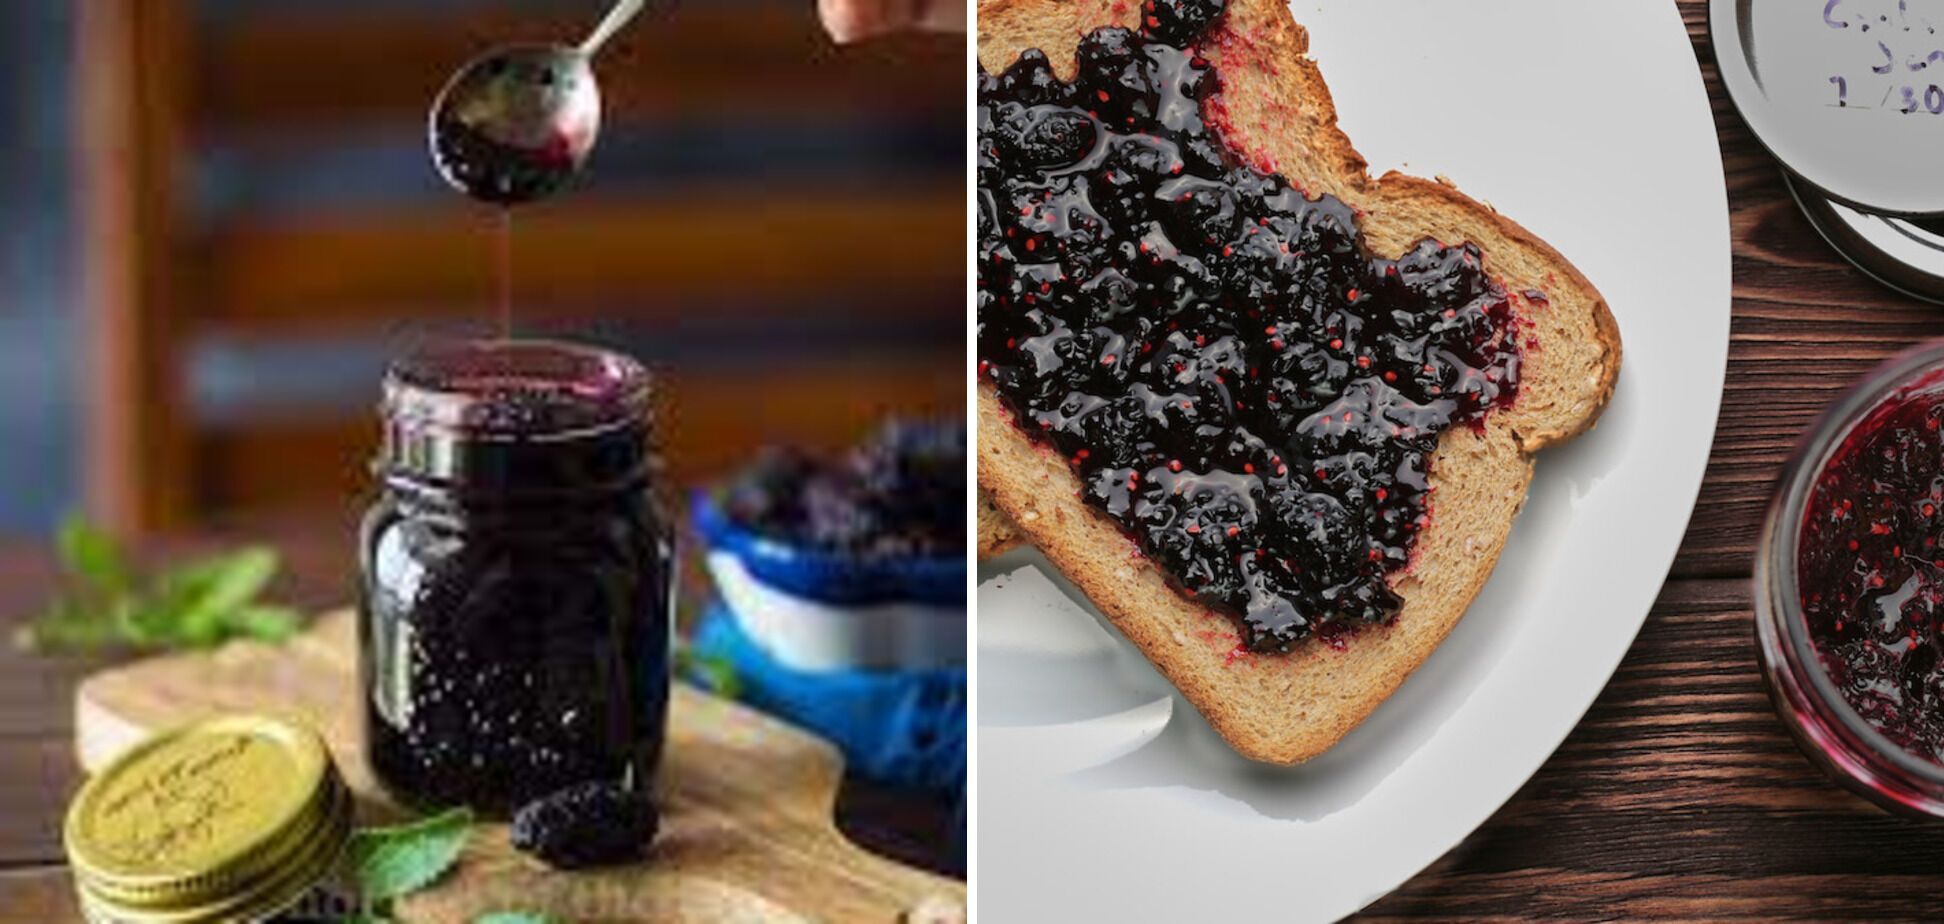 How to make jam-jelly from black currants: you need only 3 ingredients